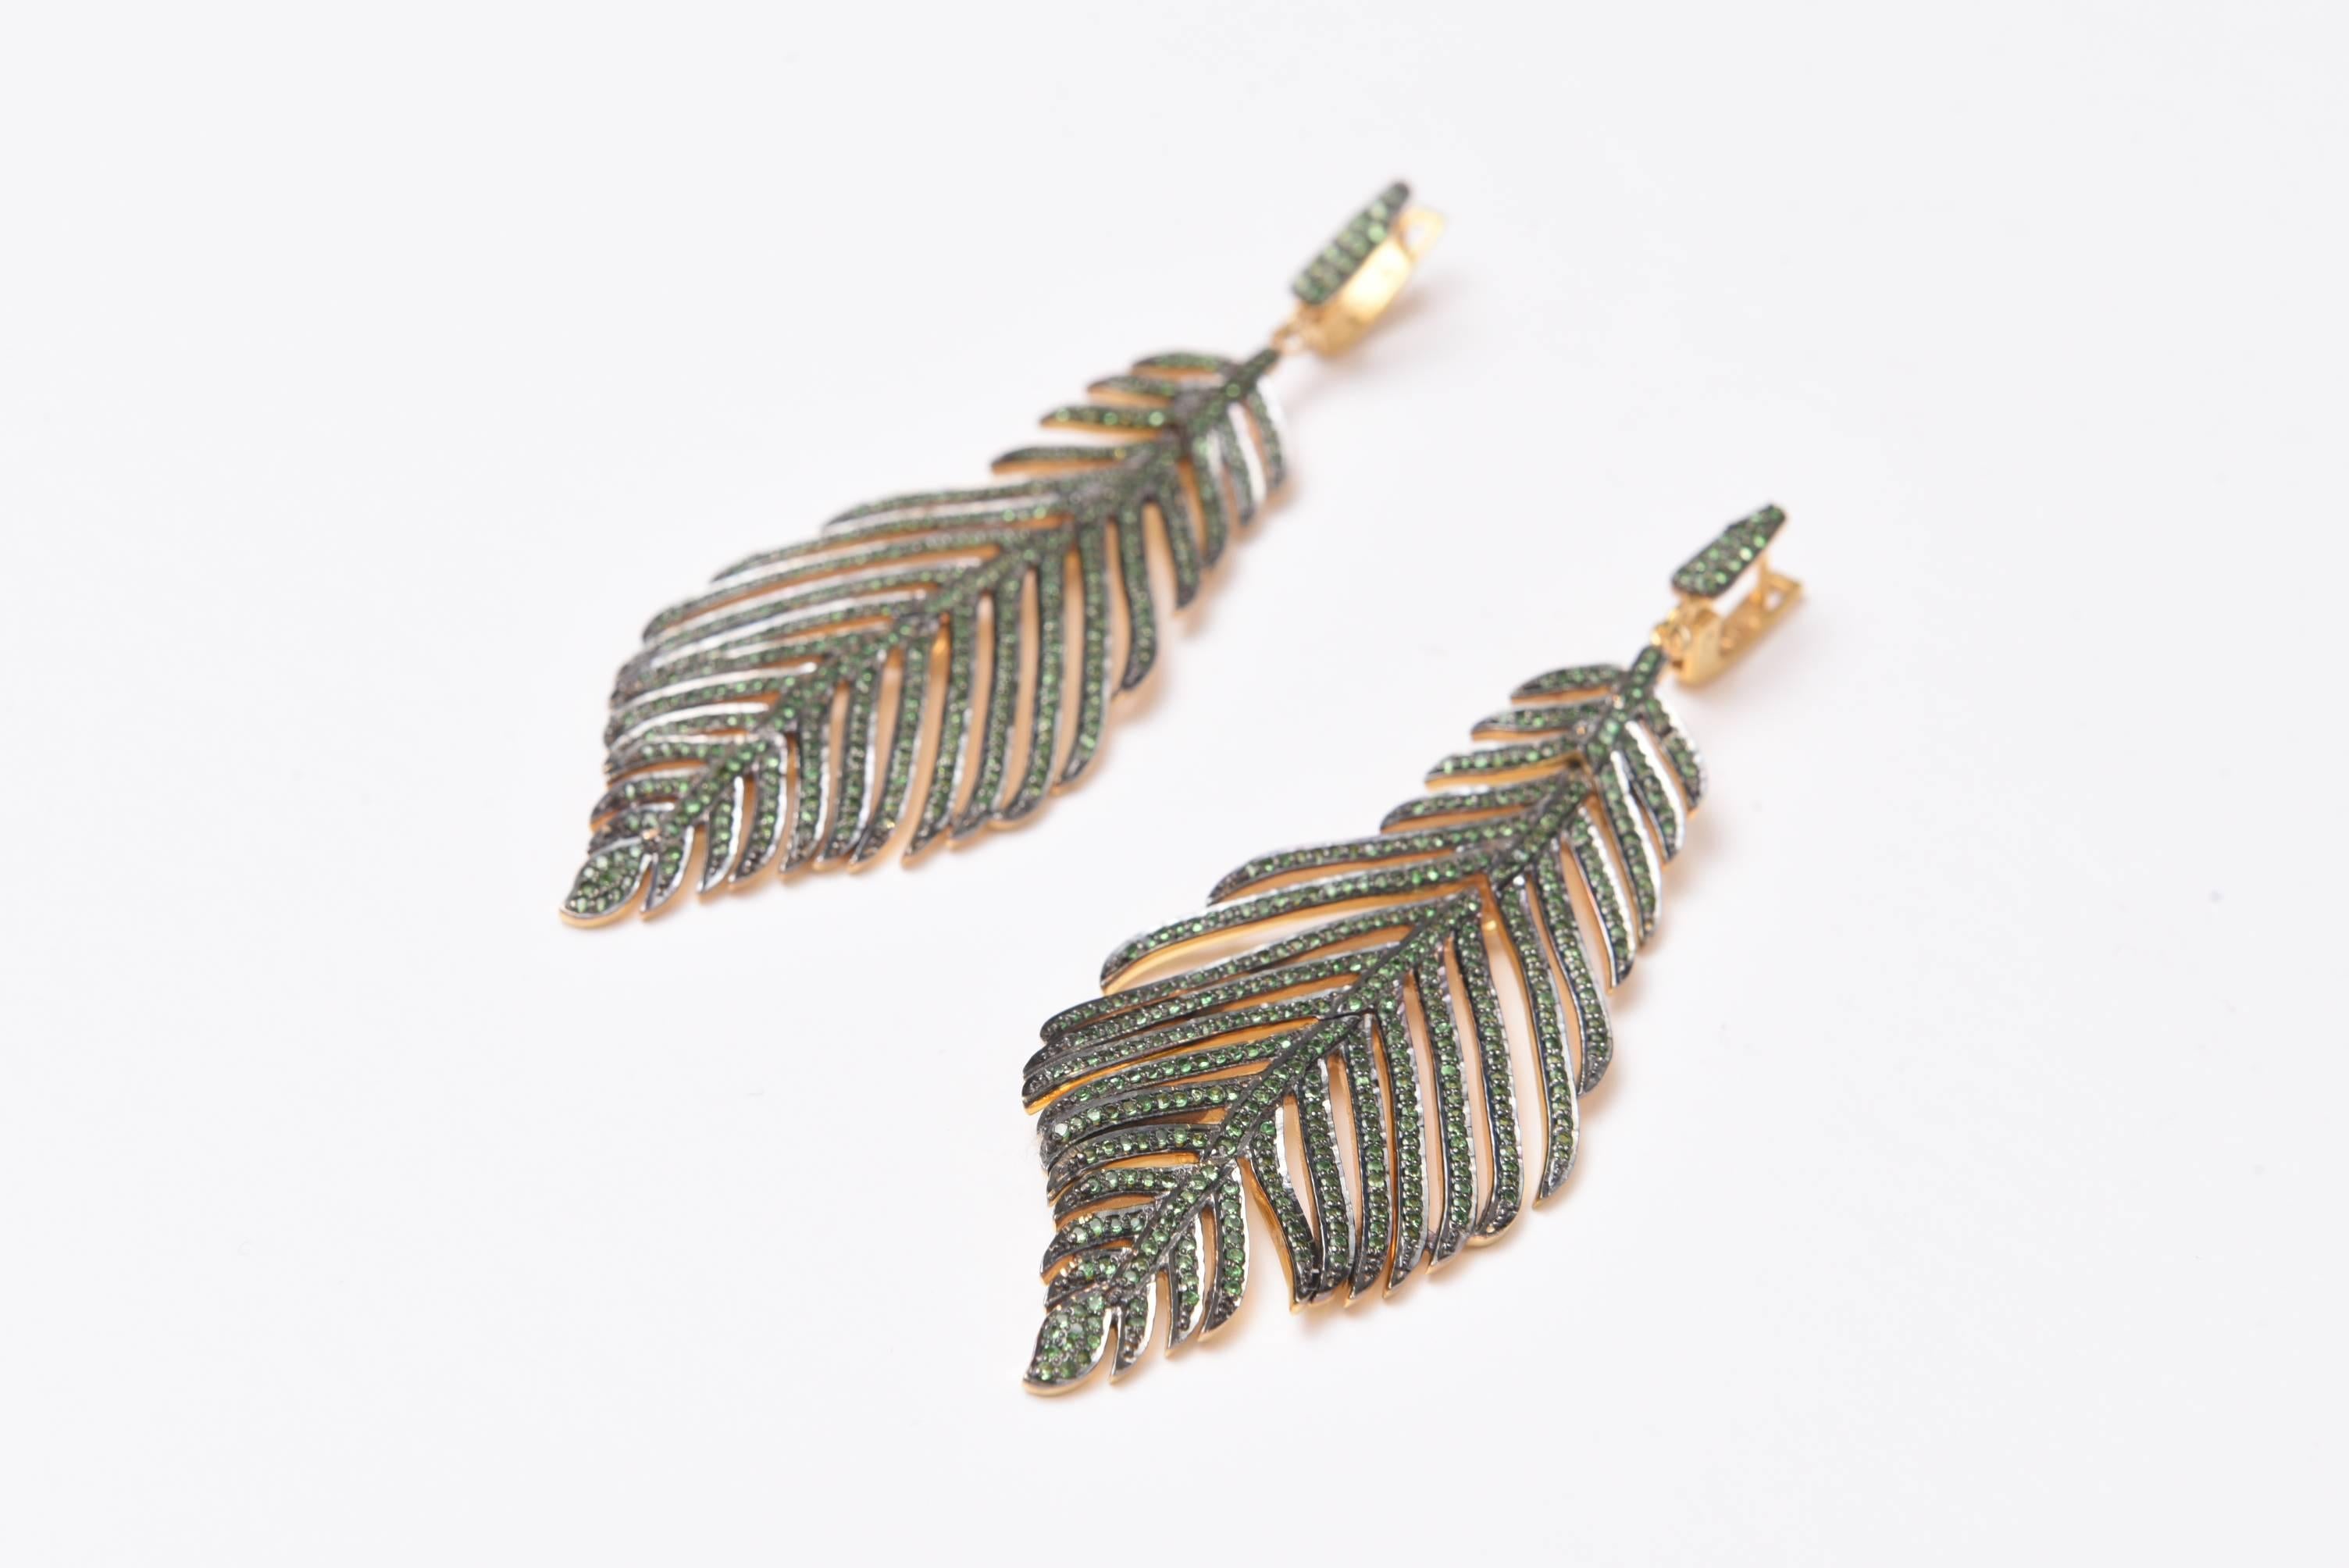 A stunning pair of pave` set tsavorite feather earrings set in vermeil (gold over sterling) with 4 hinge points on the back offering articulated movement when you wear them.  Post is 18K gold for pierced ears with a lever back.  Carat weight of